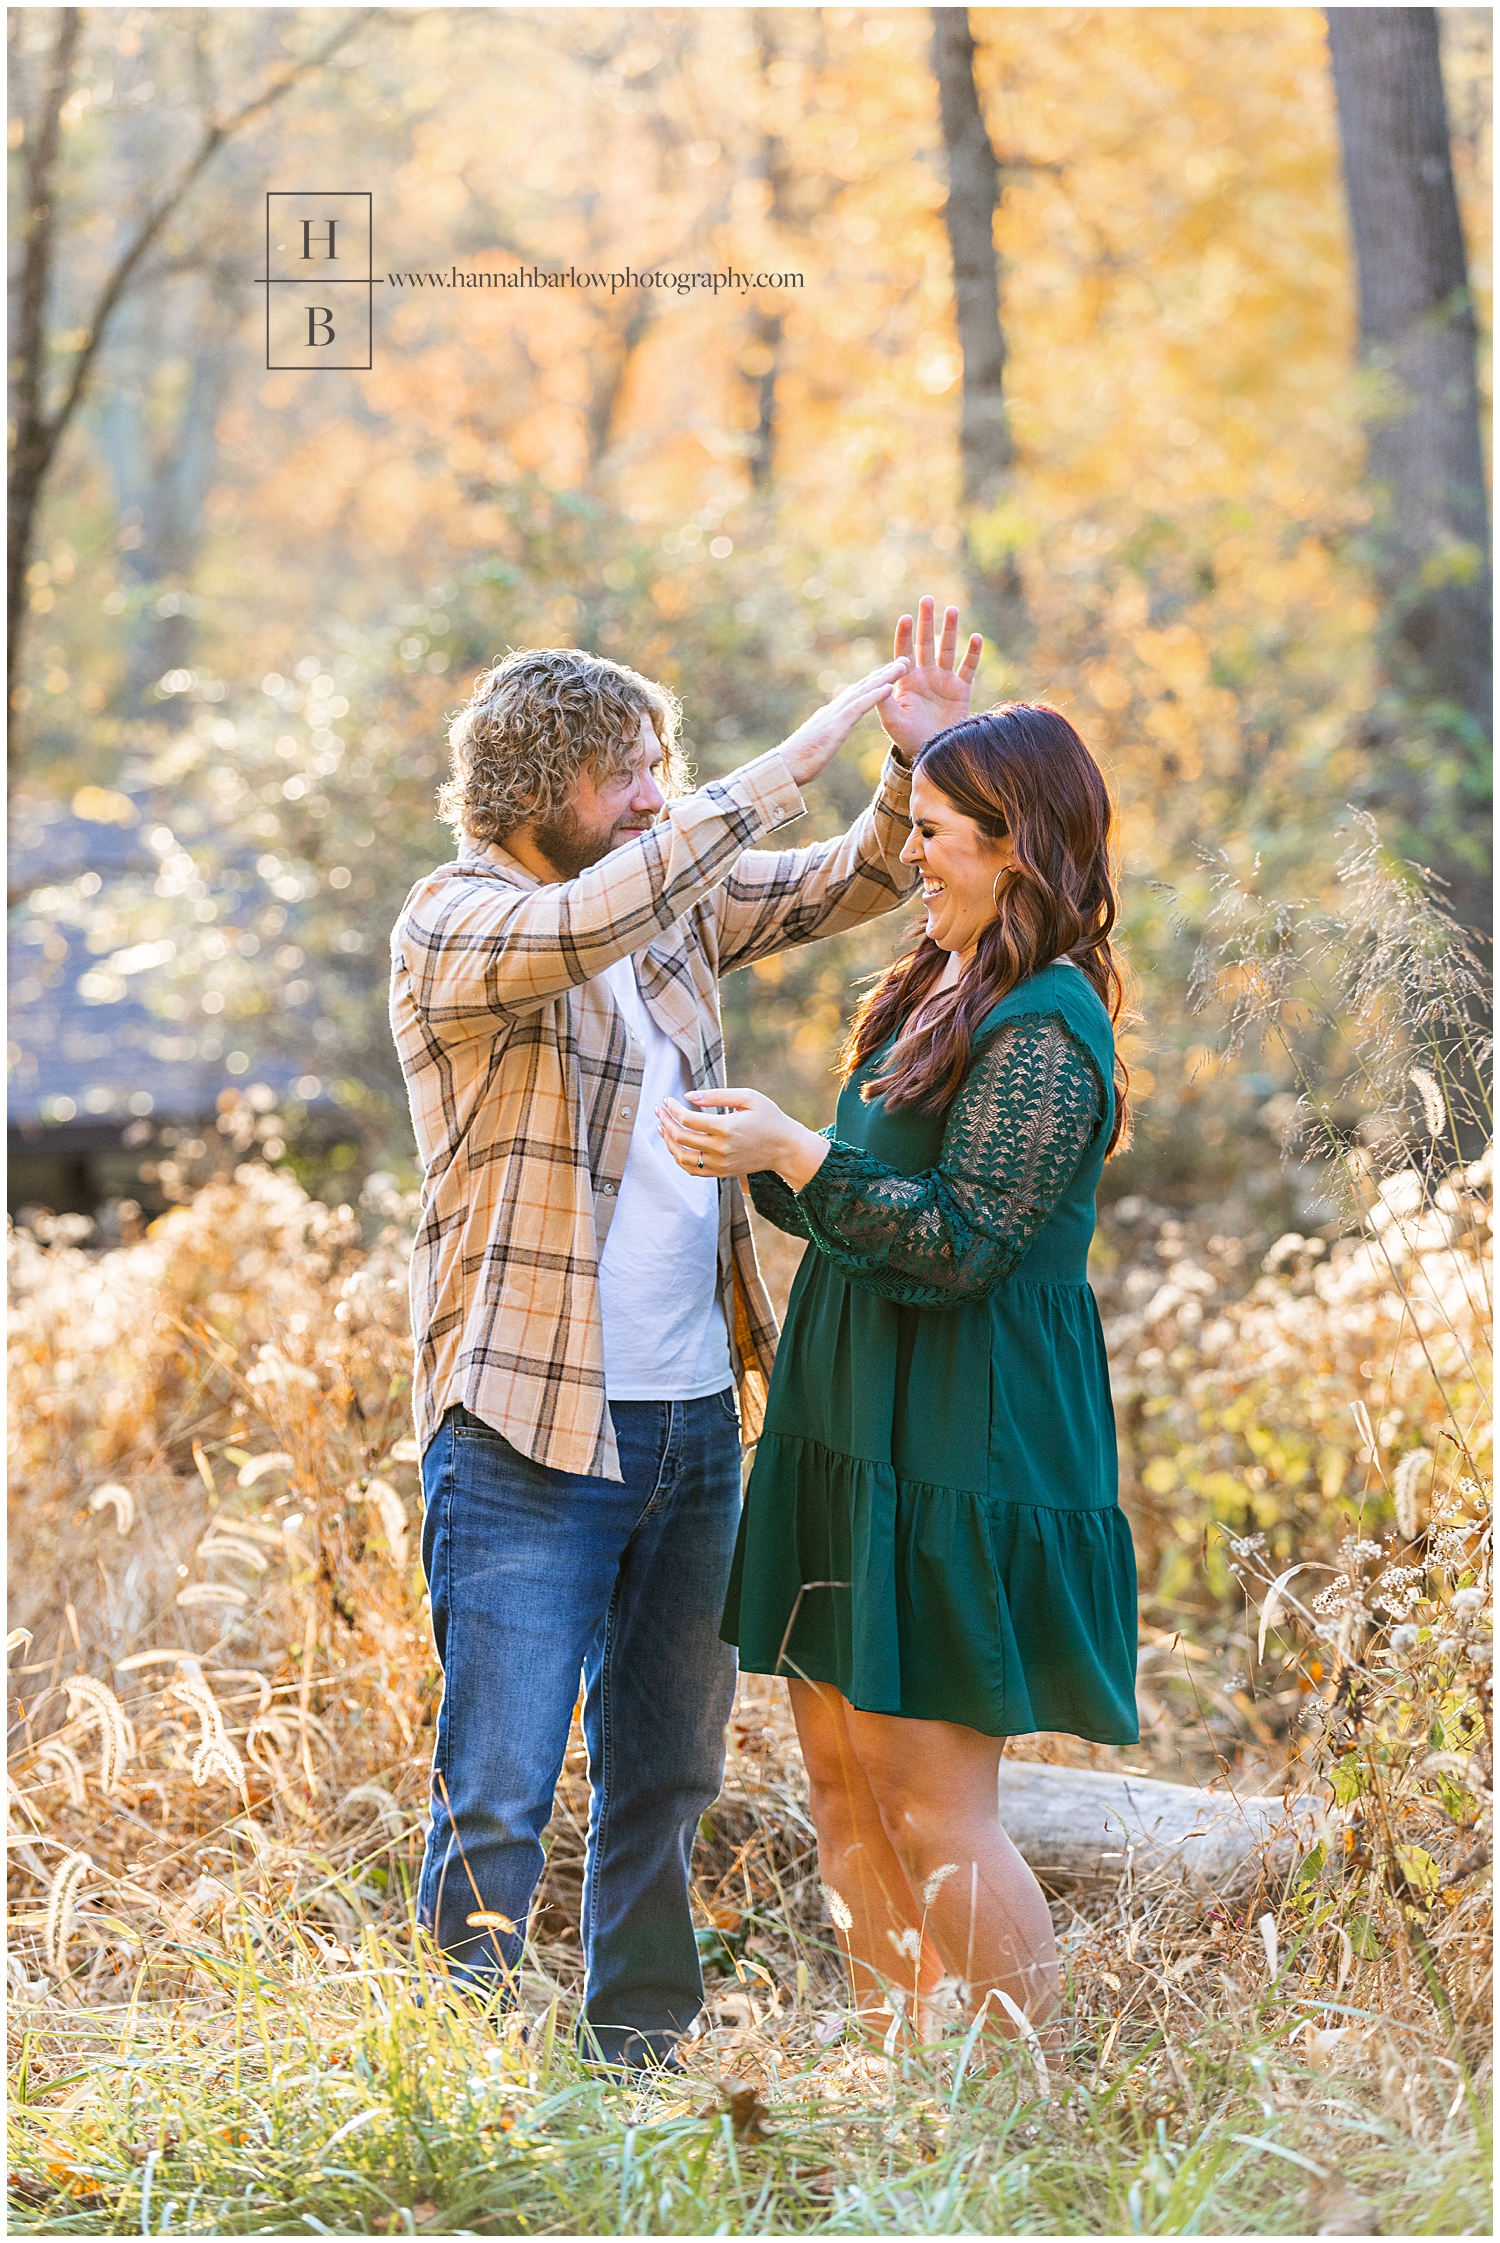 Man and woman laugh in outtake photo for engagement photos.